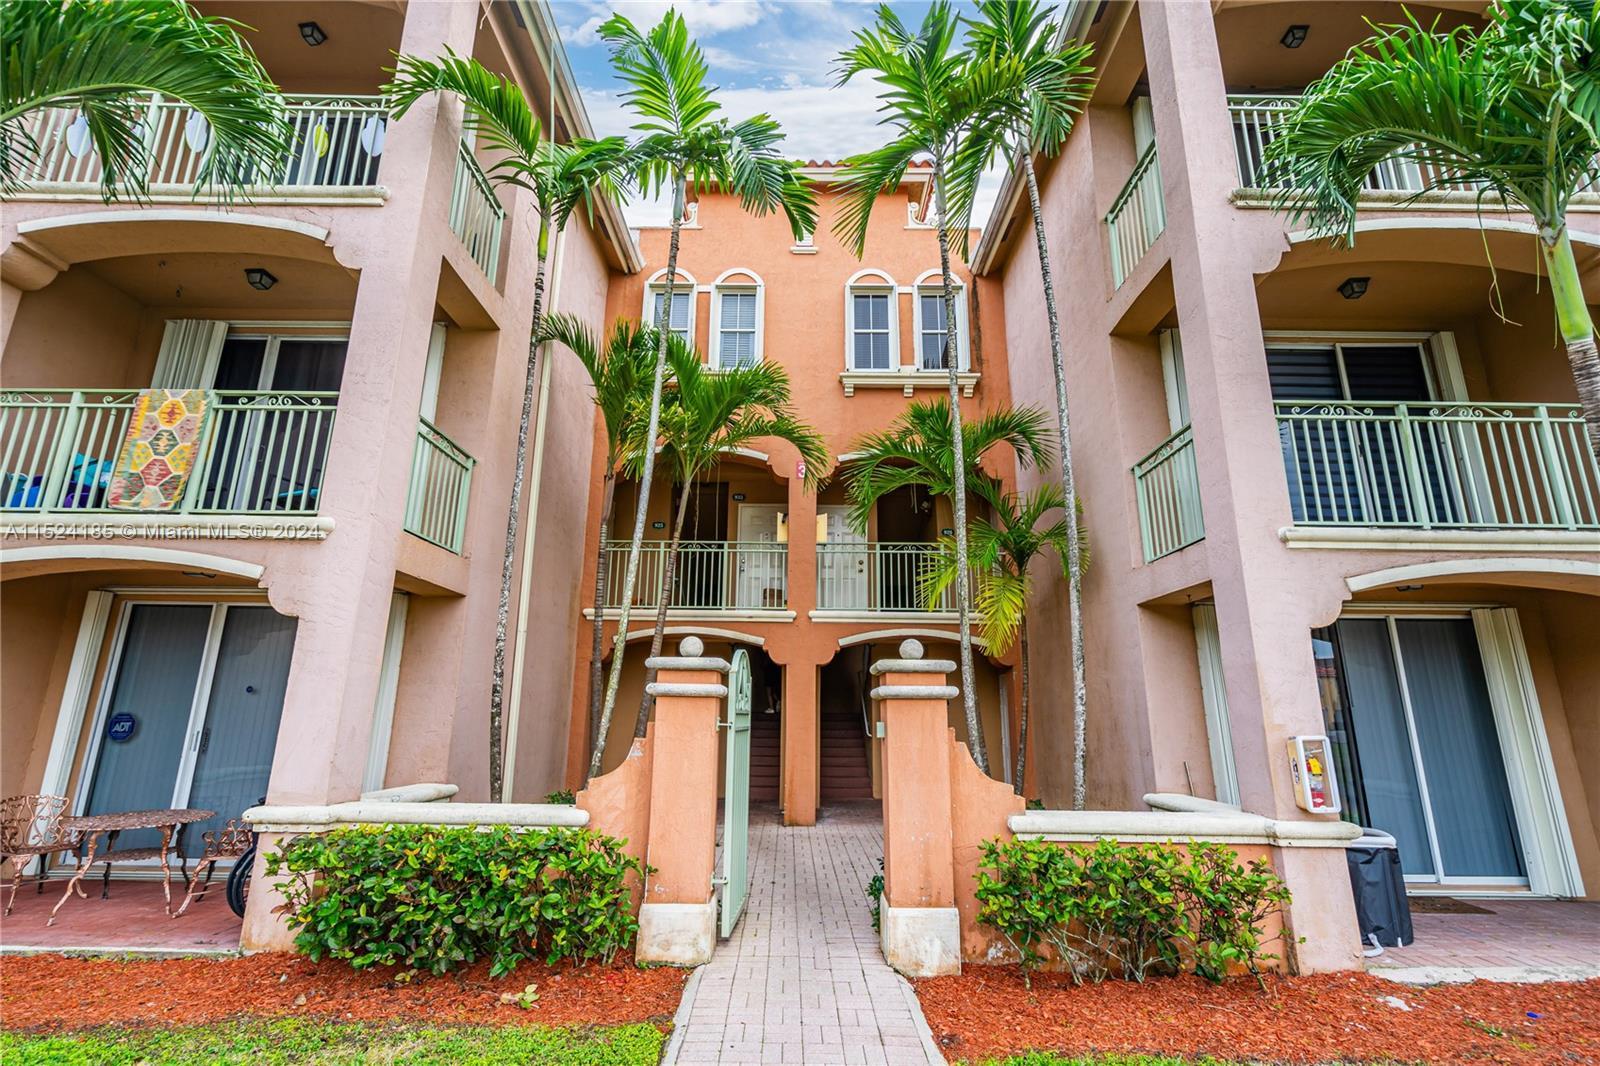 Enjoy this spacious 3 bedroom, 2 bath condo in the gated community of The Courts of Doral. Property 